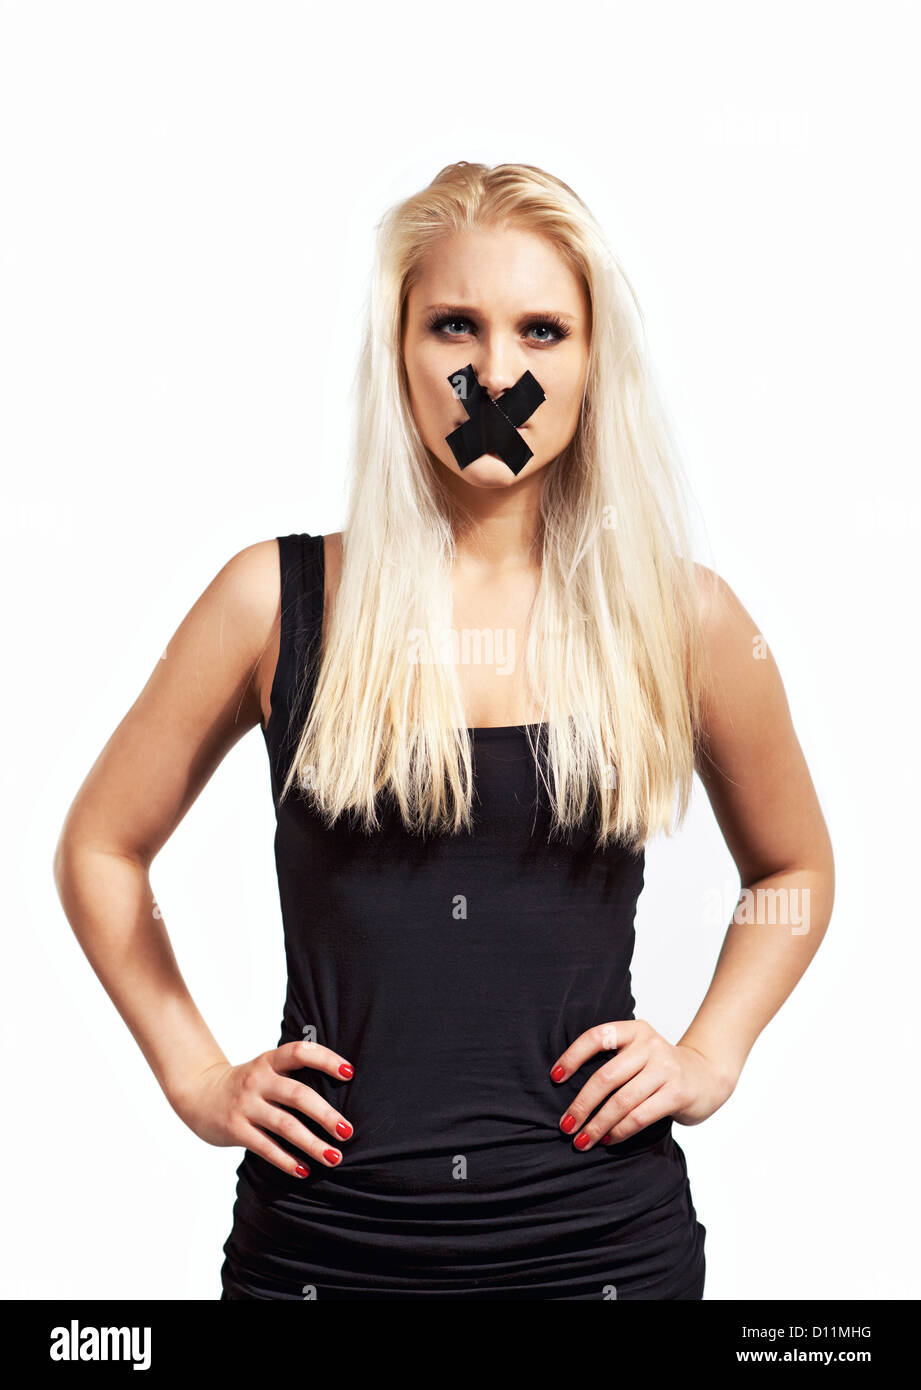 Silenced woman in protest looking angry and demanding her right for freedom of speech Stock Photo